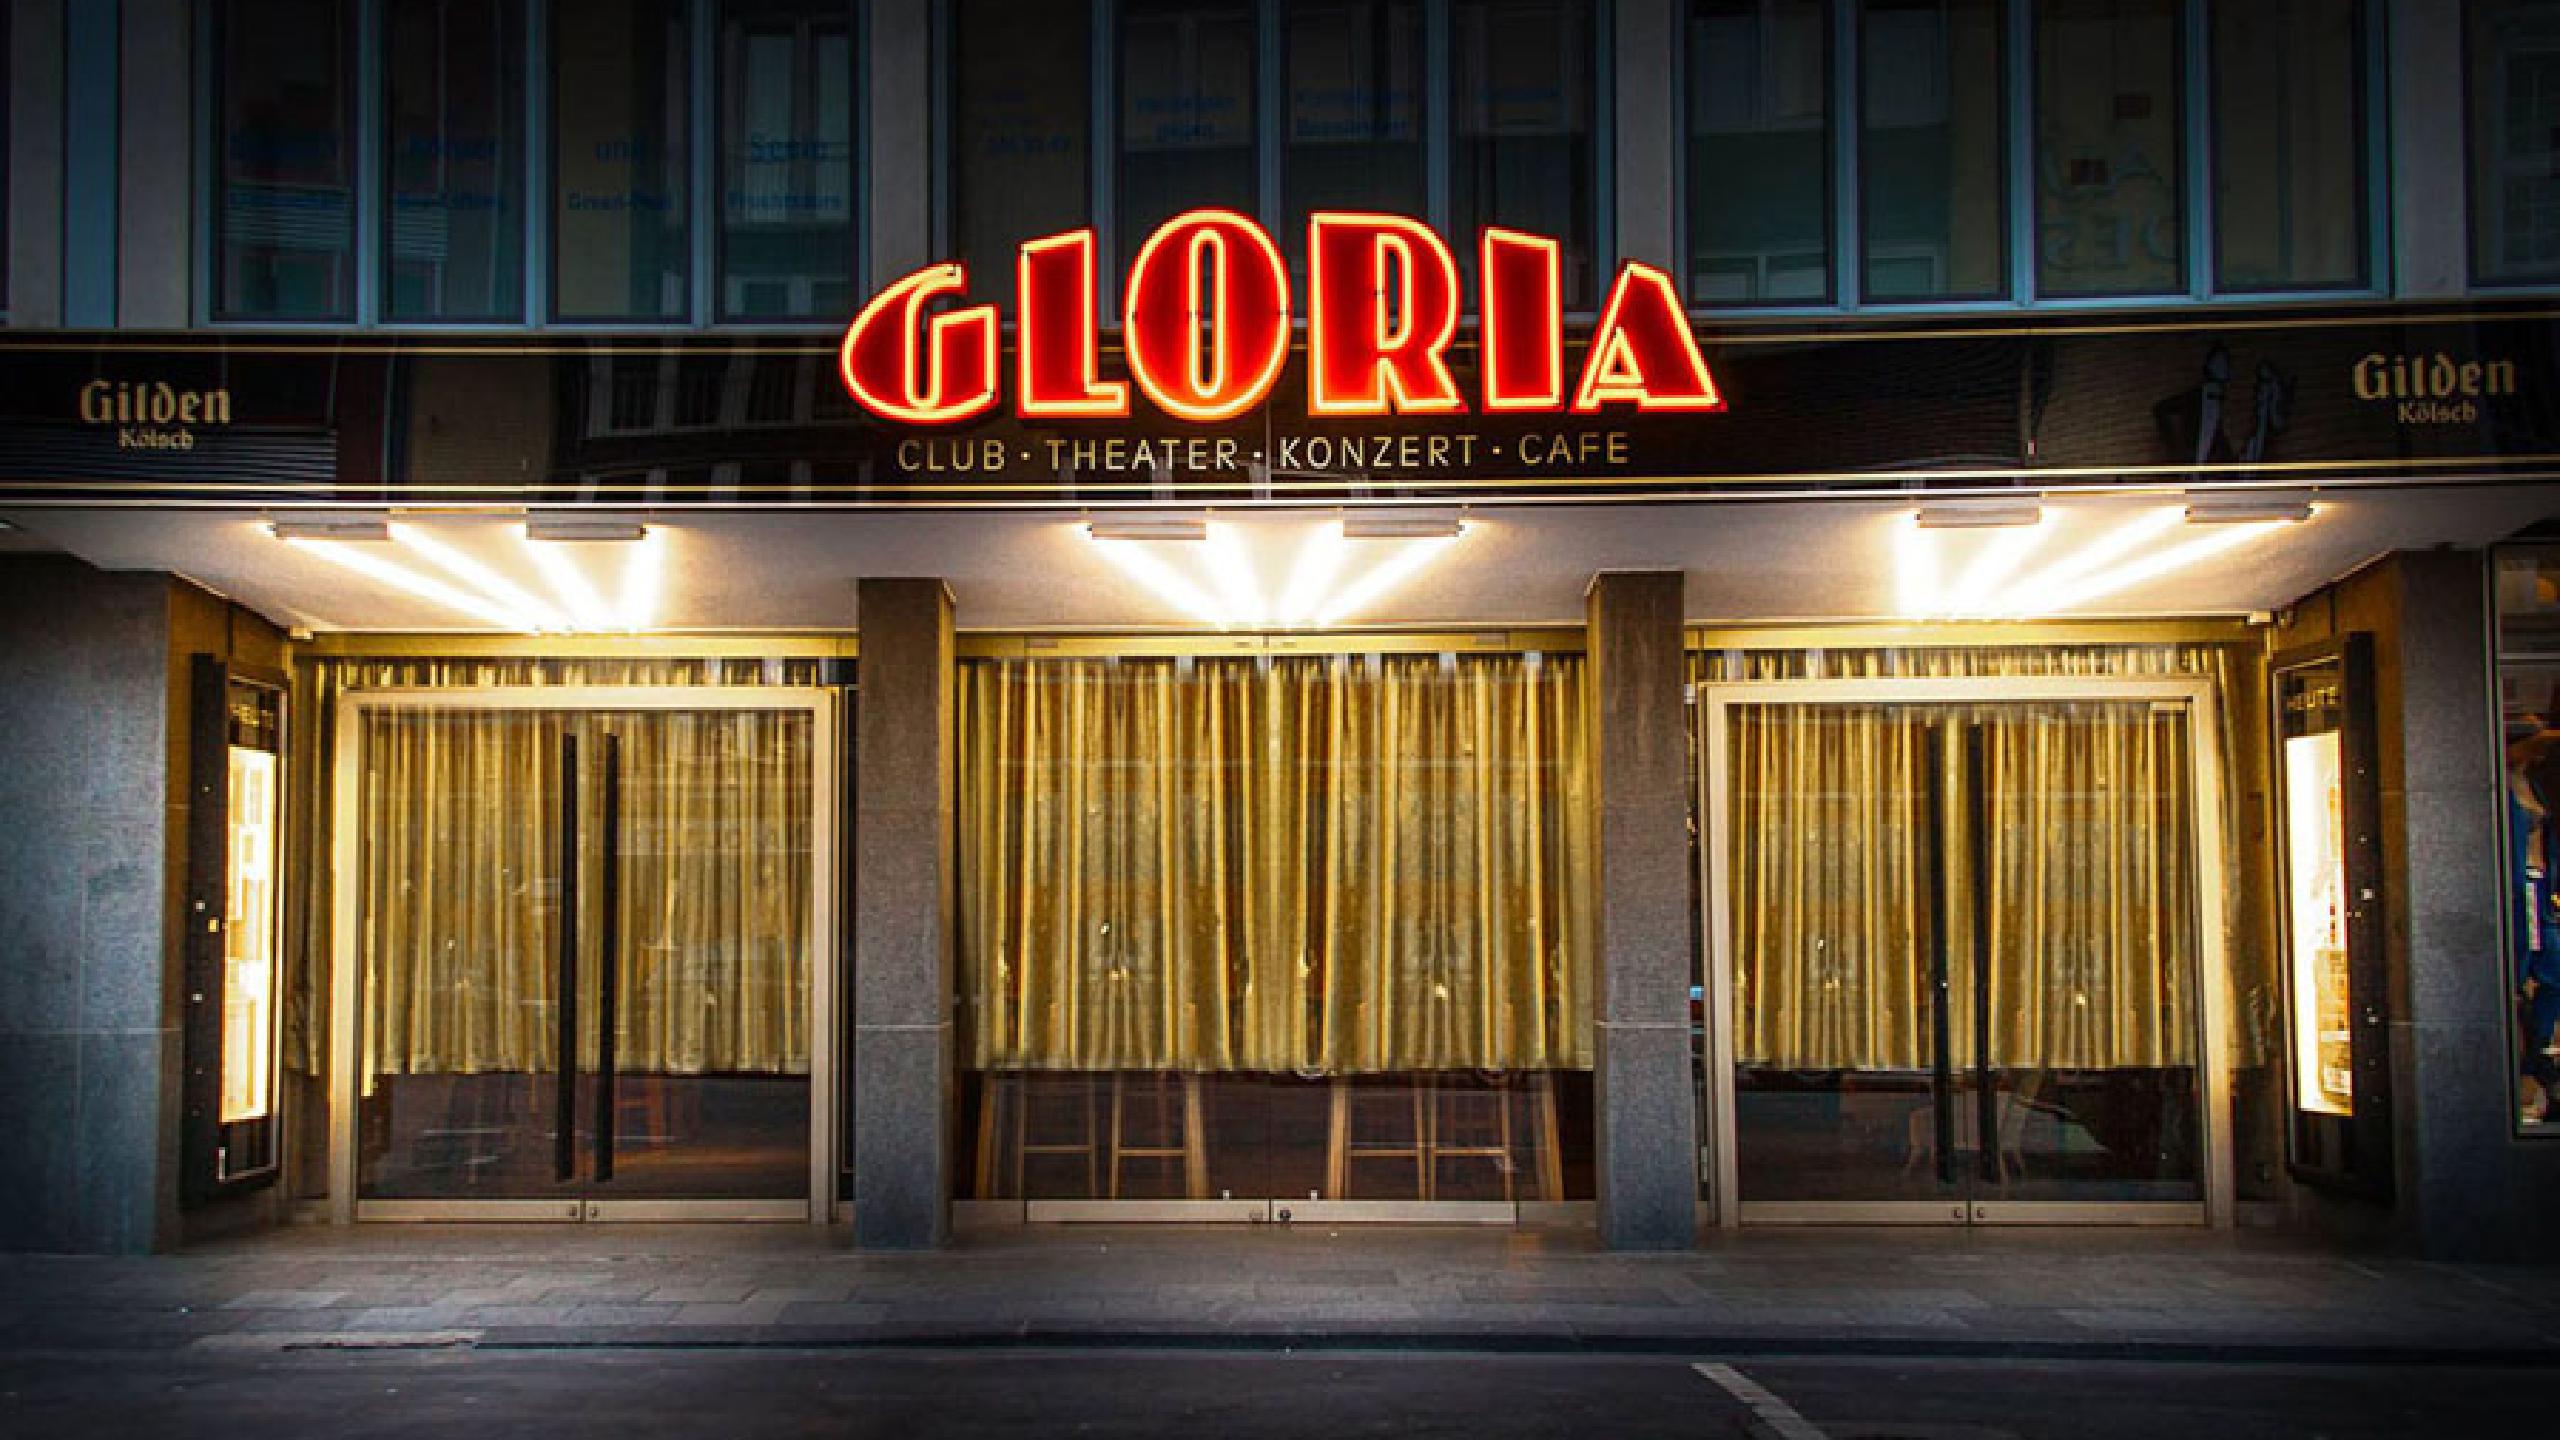 Gloria-Theater is located in Köln, Germany, specifically in Apostelnstraße ...